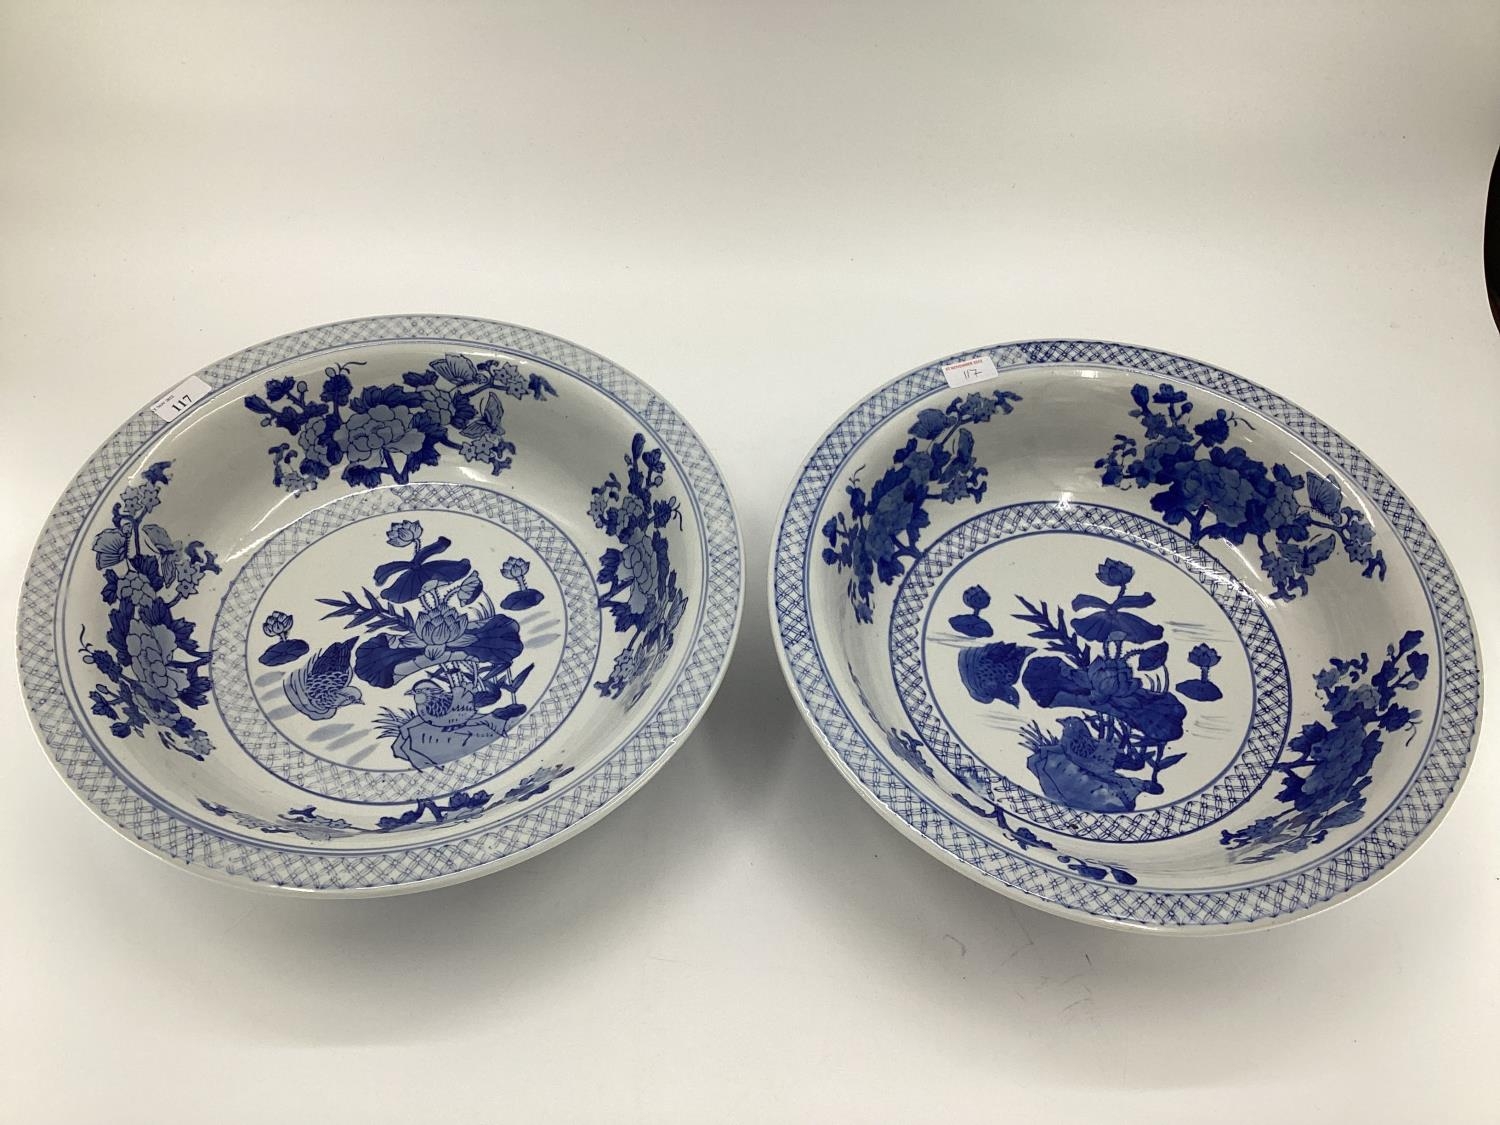 Decorative Modern Blue and White China: a Moyses Stevens large open bowl, and a similar one; - Image 7 of 11